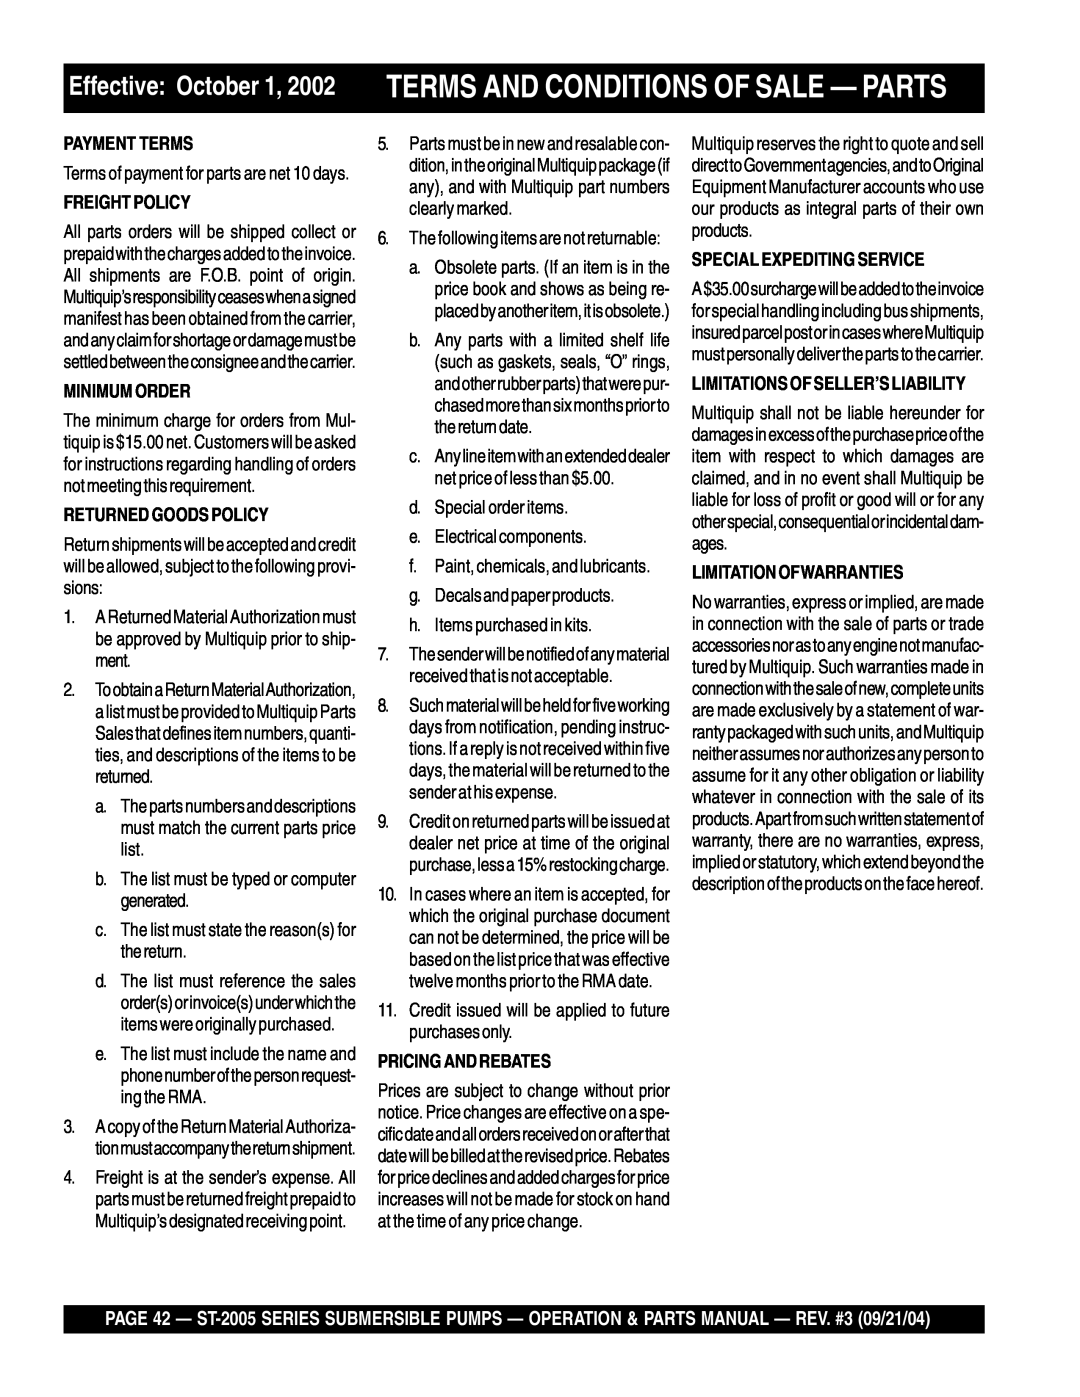 Multiquip ST-2005 manual Effective October 1, 2002 TERMS AND CONDITIONS OF SALE - PARTS, Payment Terms, Freightpolicy 